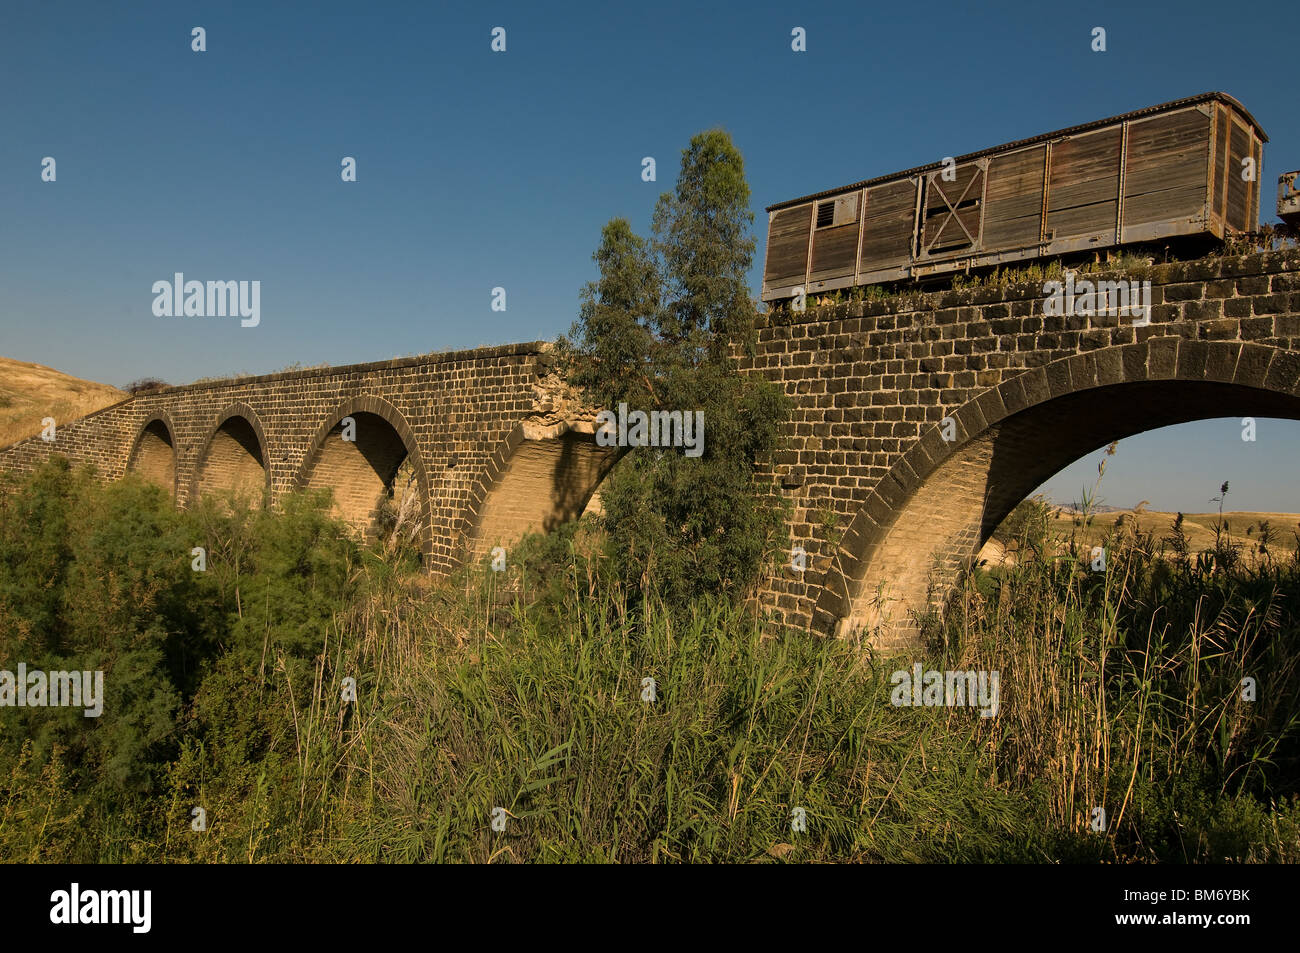 An abandoned train wagon on the former Ottoman railroad bridge at the old Gesher Railway Station of the Jezreel Valley Railway in Gesher, Israel Stock Photo